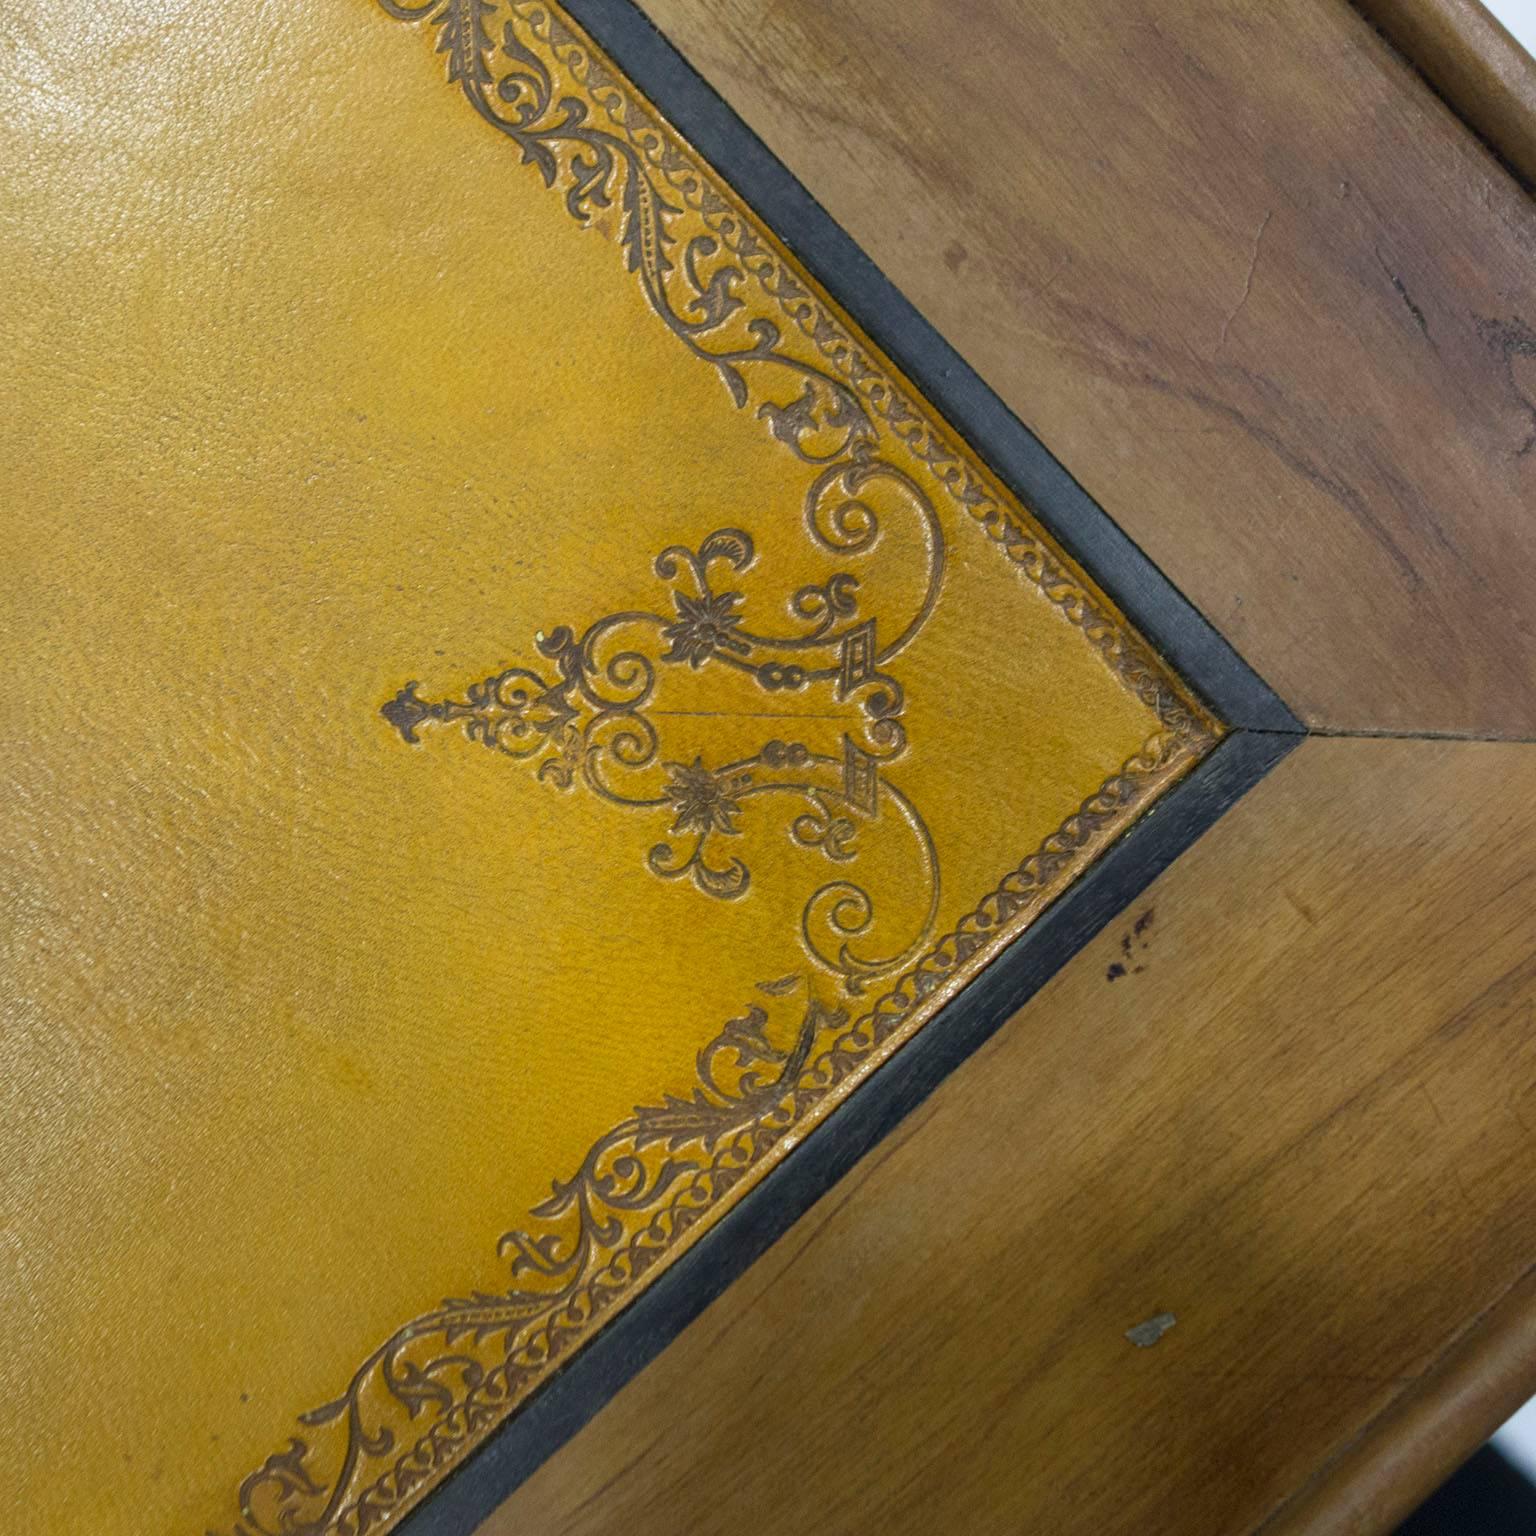 Early 19th century French Provincial game table with tooled leather top, four drawers and hoof feet.